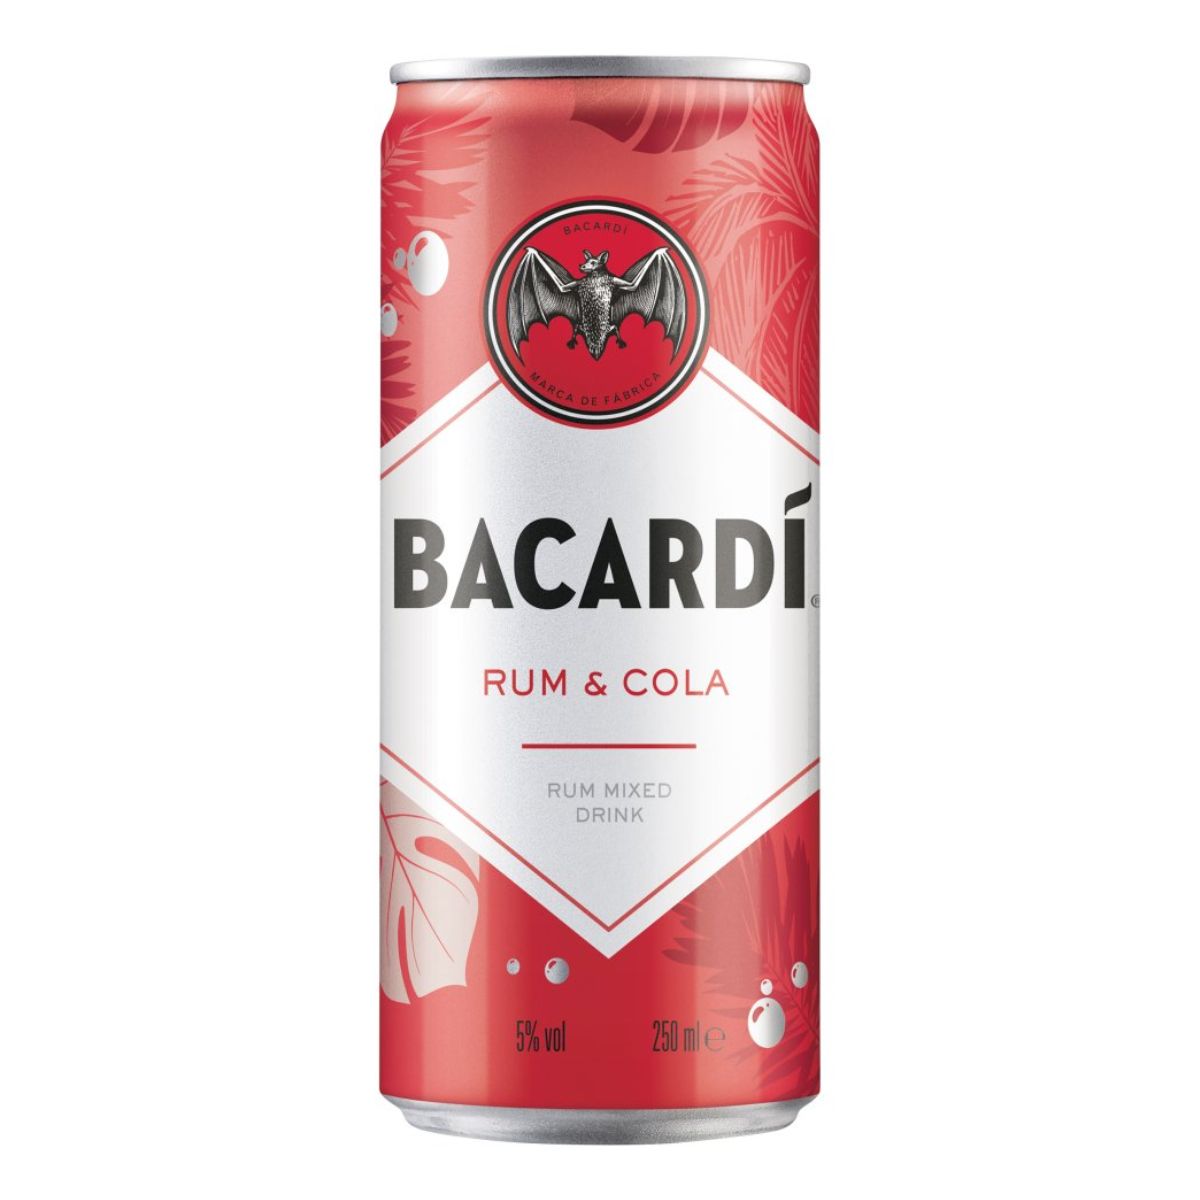 A can of Bacardi - Rum & Cola Rum Mixed Drink (5% ABV) - 250ml.